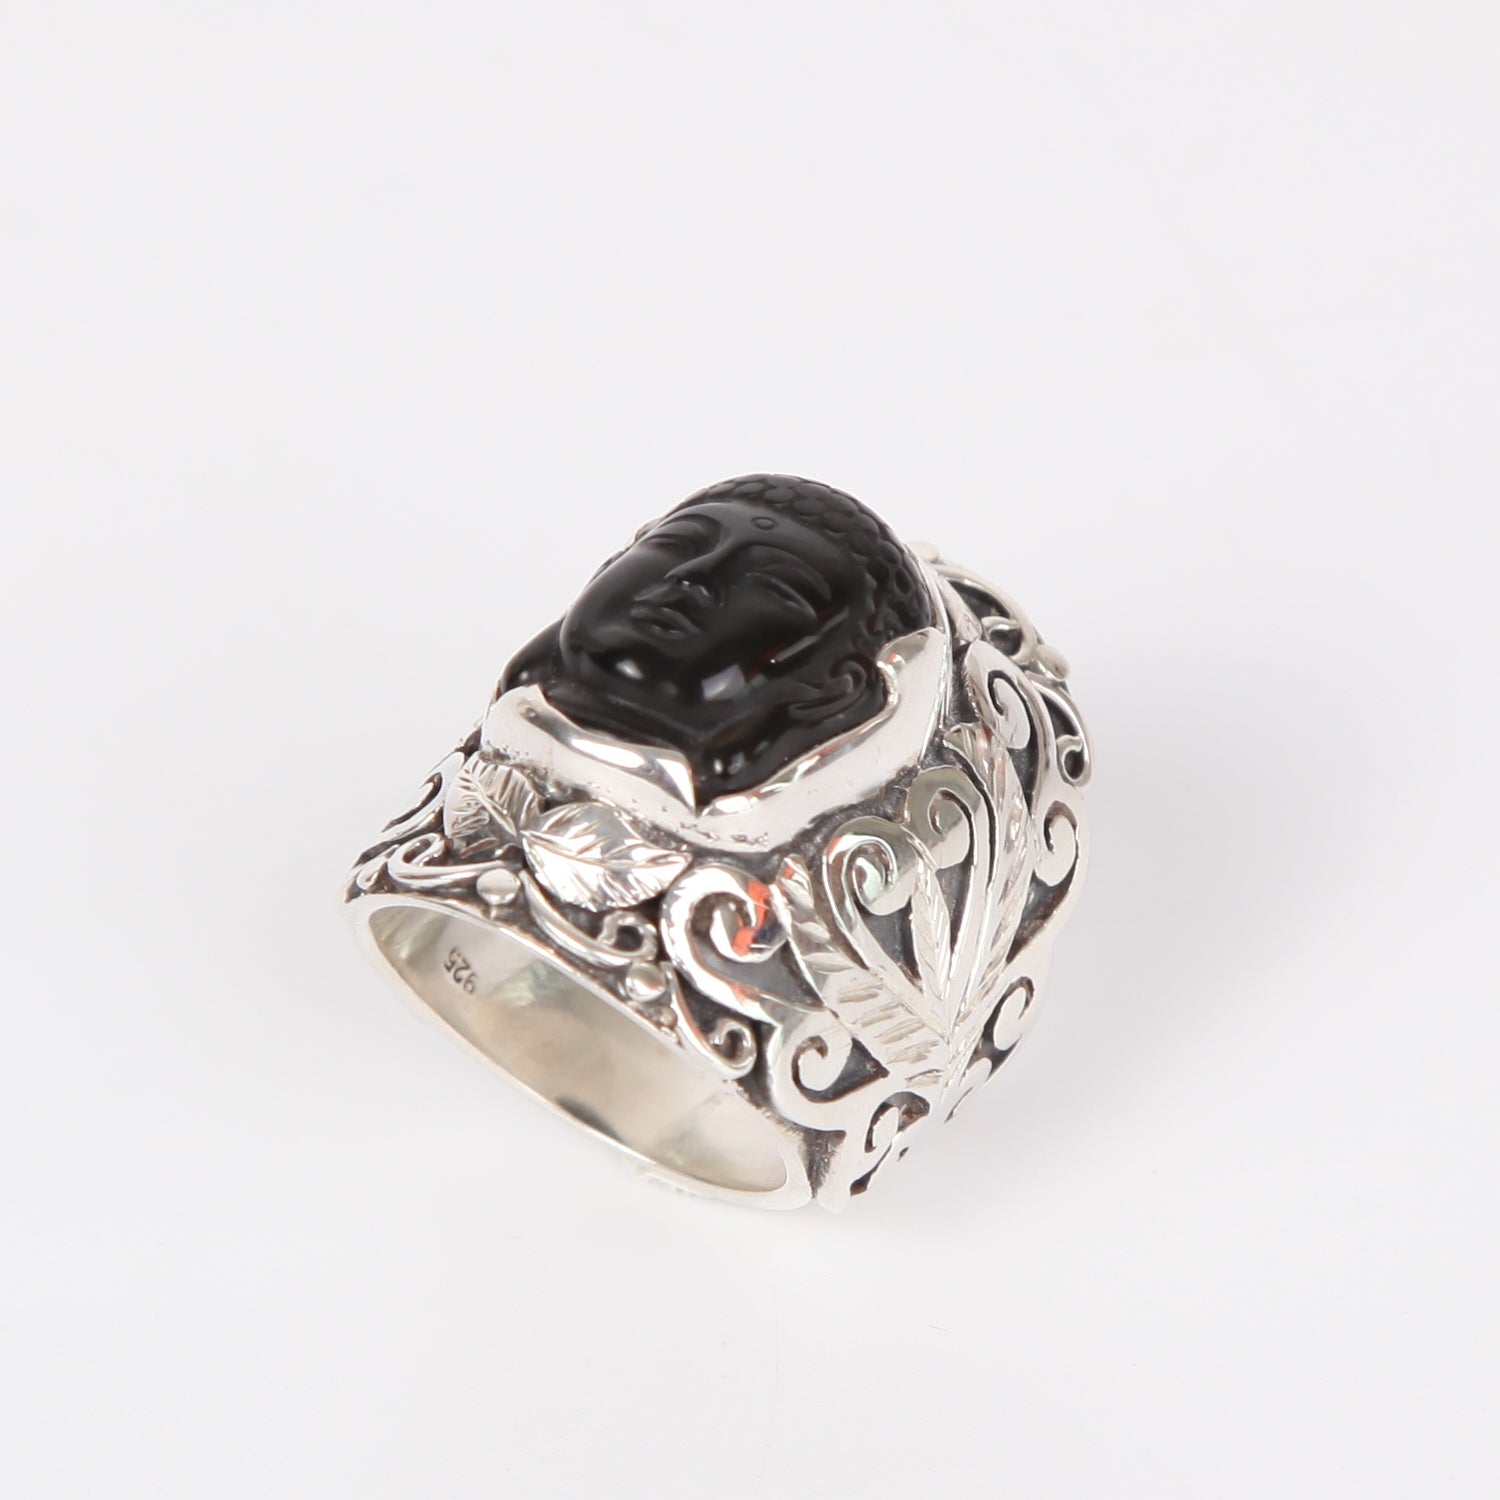 Obsidian Buddha Head Ring with Sterling Silver